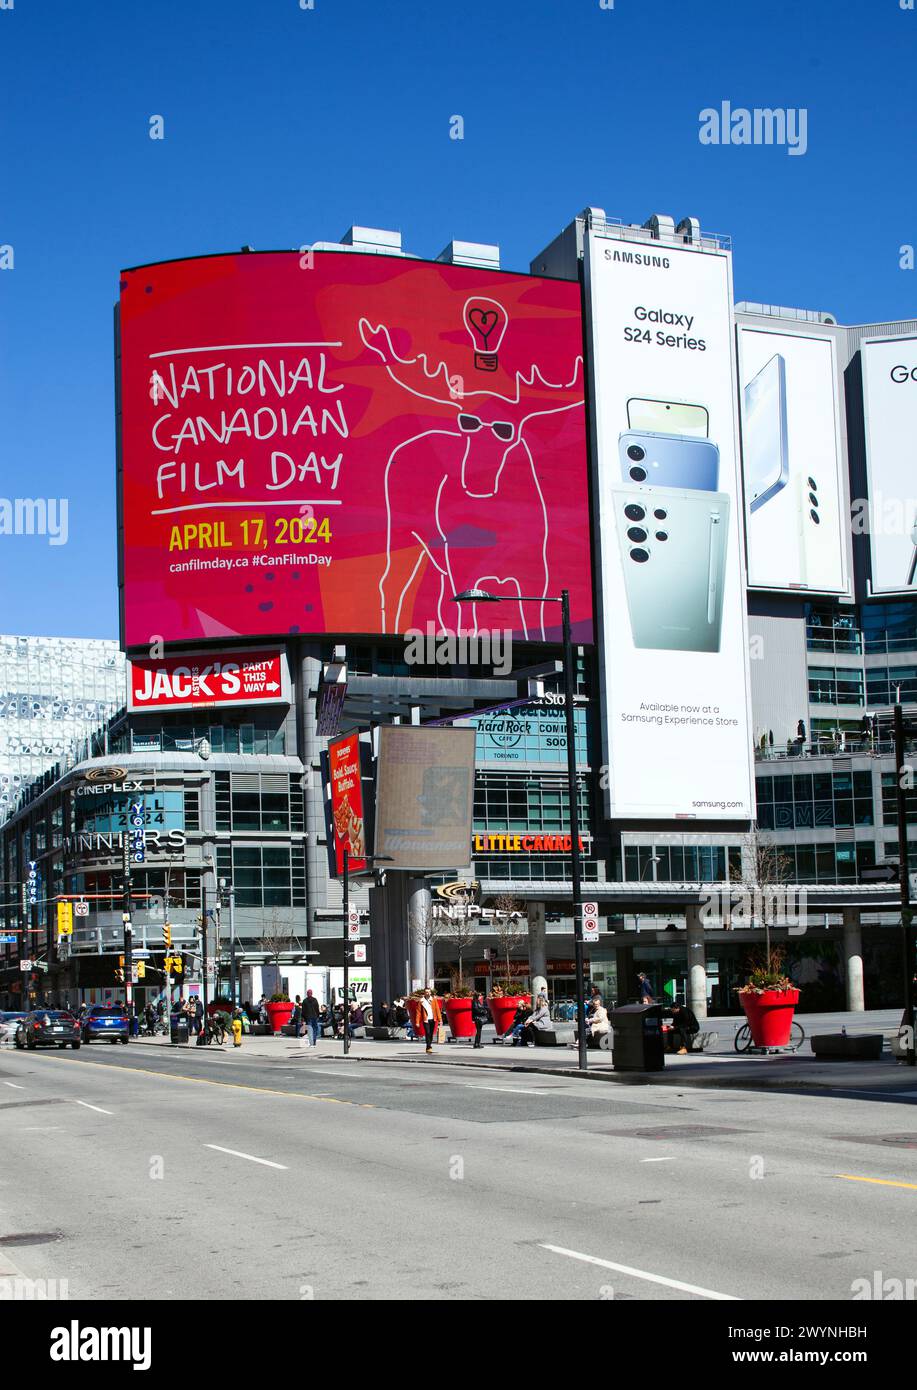 National Canadian Film Day advertising on electronic billboard. Yonge street and Dundas square in downtown Toronto, Canada Stock Photo